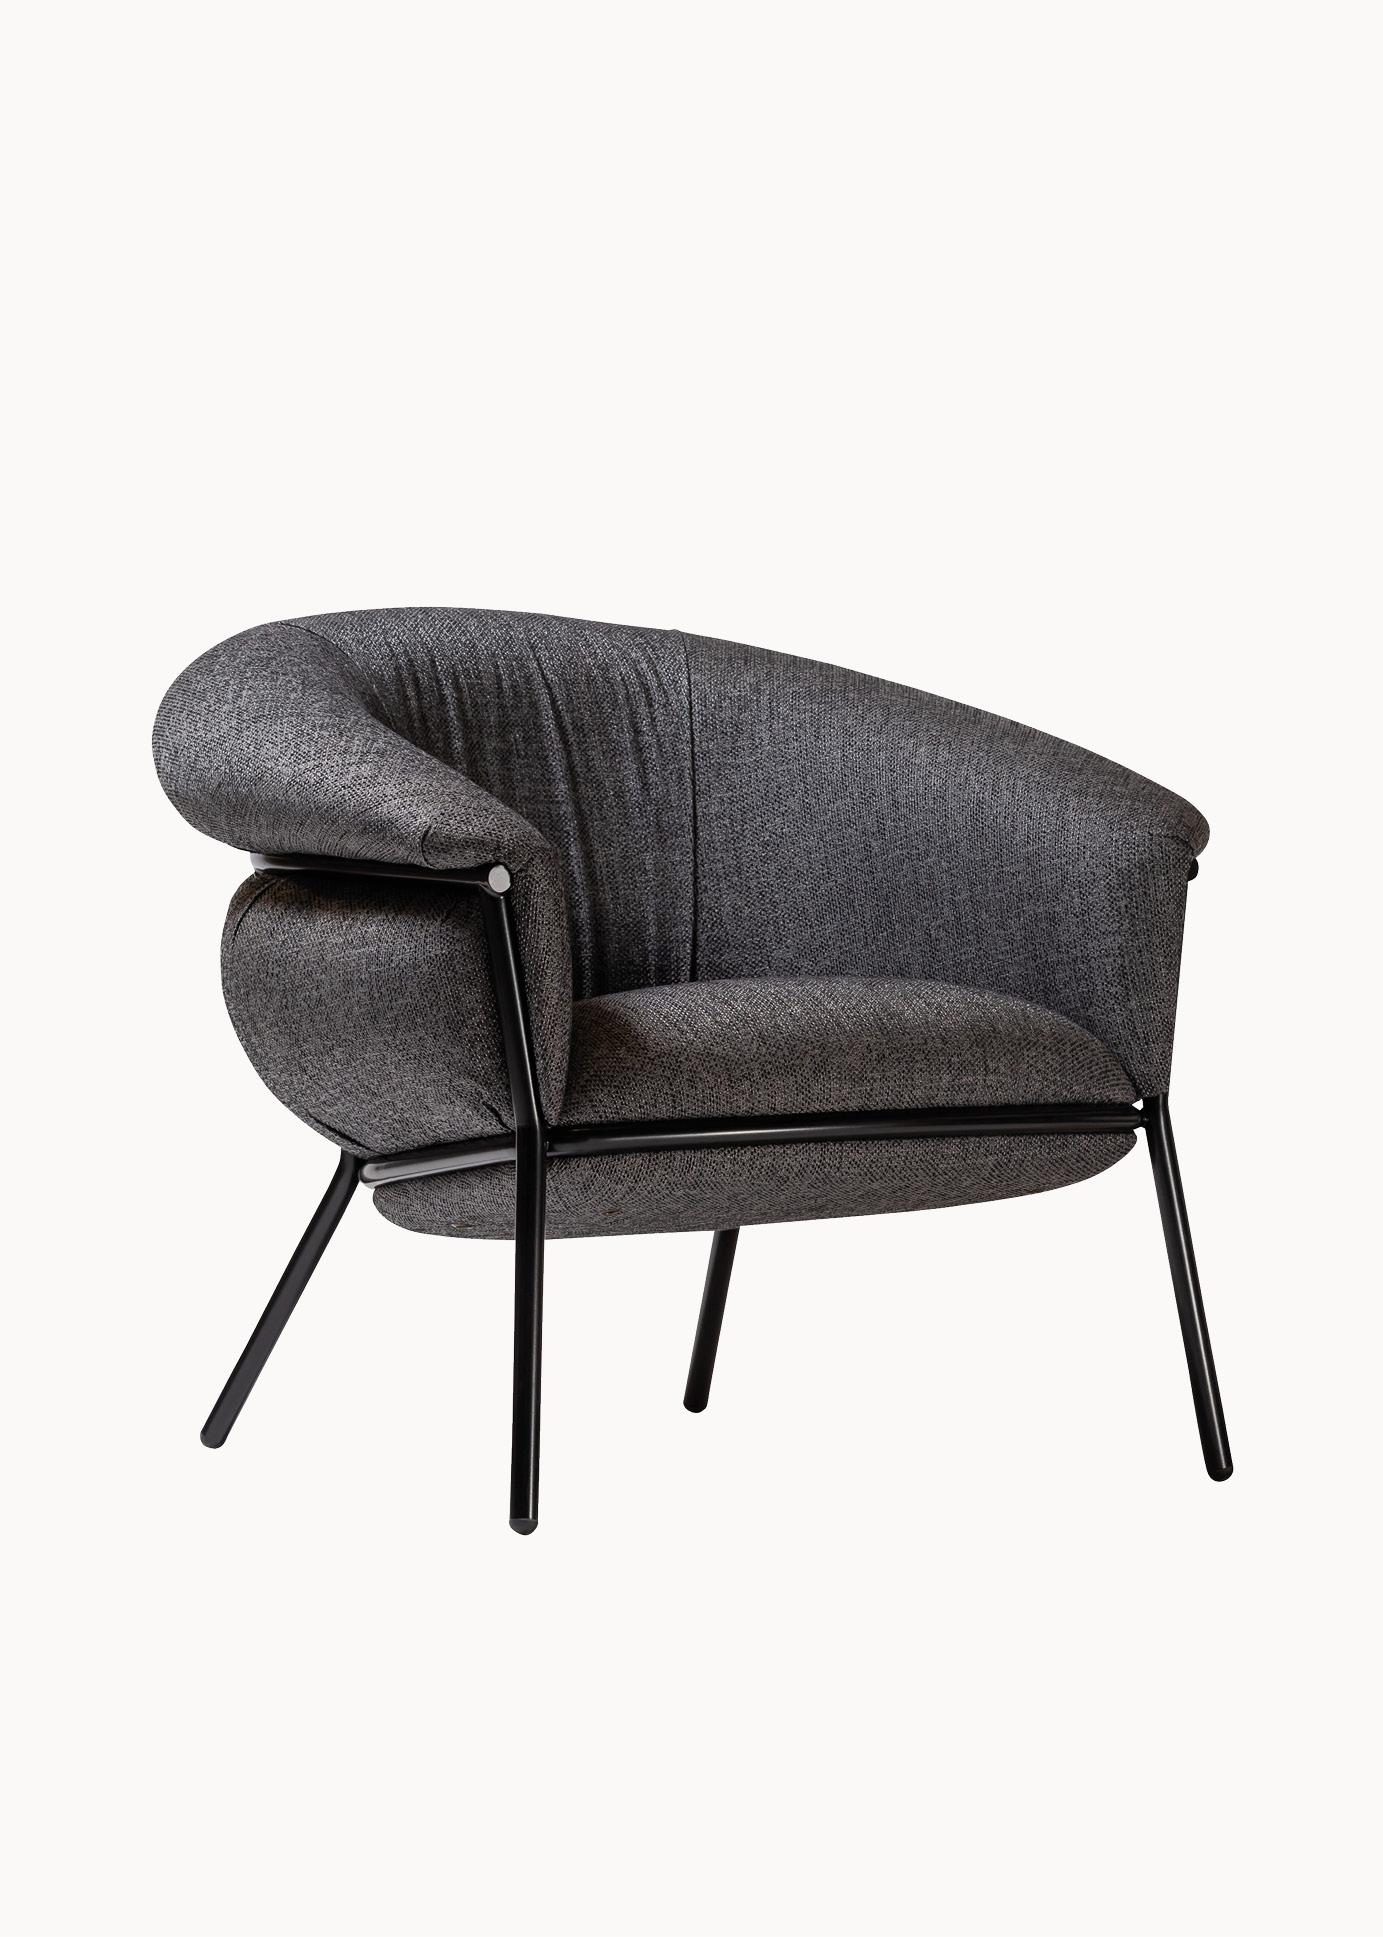 Contemporary Grasso Armchair by Stephen Burks padded grey curved upholstery black structure For Sale